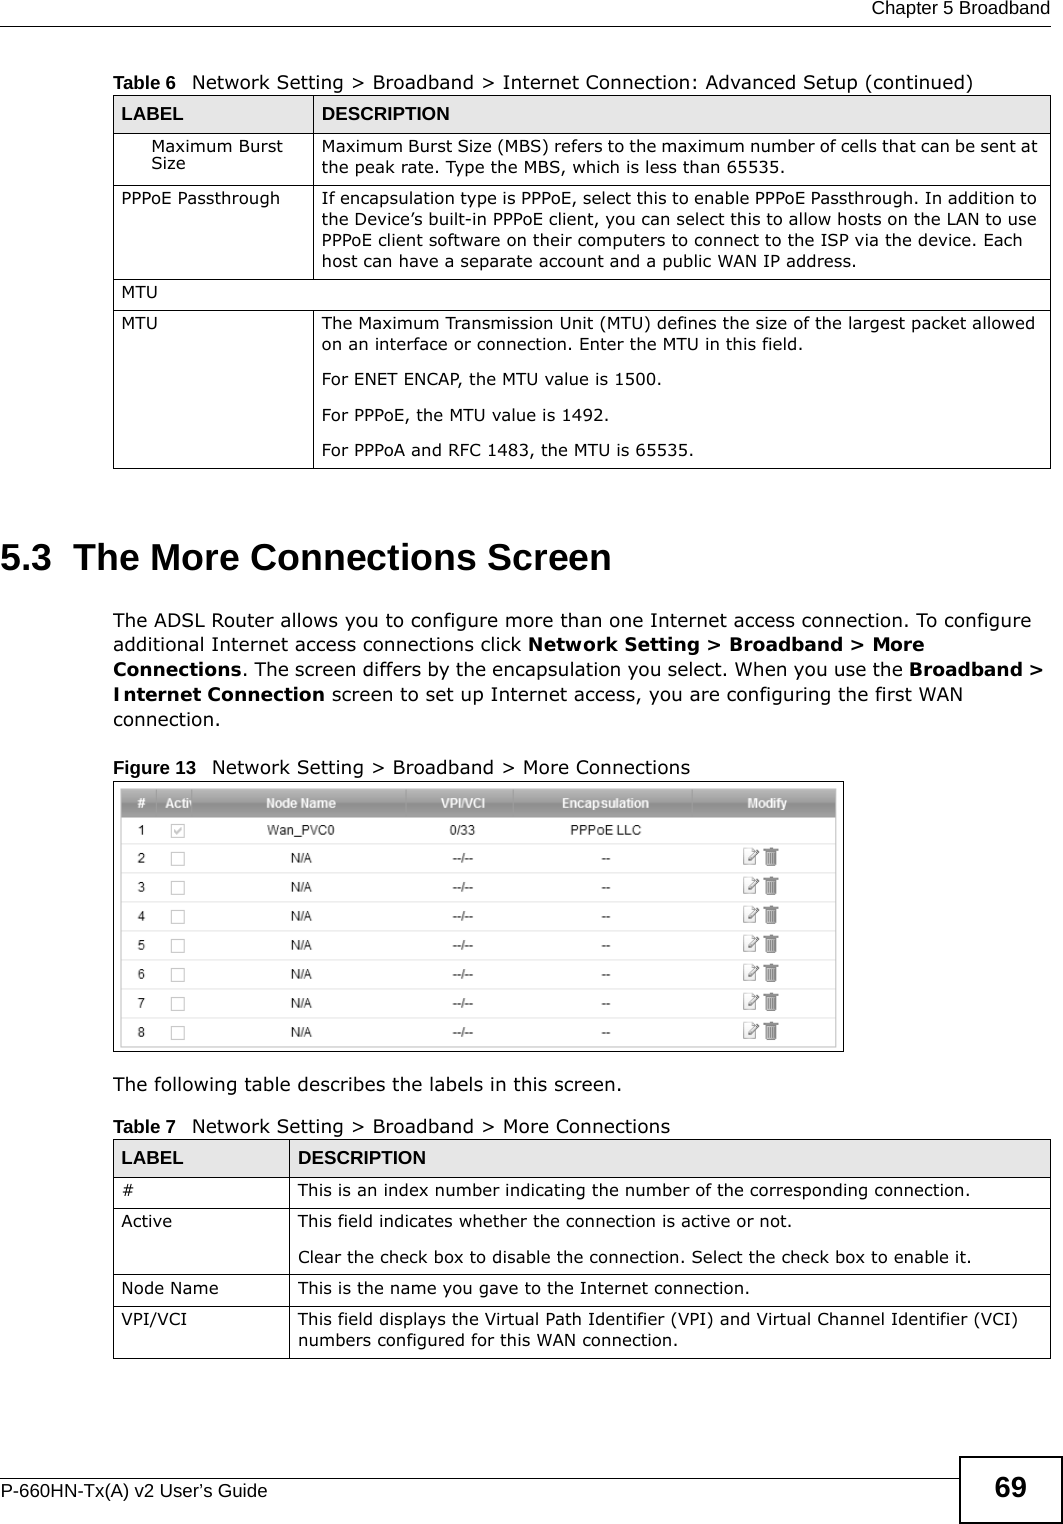  Chapter 5 BroadbandP-660HN-Tx(A) v2 User’s Guide 695.3  The More Connections ScreenThe ADSL Router allows you to configure more than one Internet access connection. To configure additional Internet access connections click Network Setting &gt; Broadband &gt; More Connections. The screen differs by the encapsulation you select. When you use the Broadband &gt; Internet Connection screen to set up Internet access, you are configuring the first WAN connection. Figure 13   Network Setting &gt; Broadband &gt; More ConnectionsThe following table describes the labels in this screen.  Maximum Burst Size Maximum Burst Size (MBS) refers to the maximum number of cells that can be sent at the peak rate. Type the MBS, which is less than 65535. PPPoE Passthrough If encapsulation type is PPPoE, select this to enable PPPoE Passthrough. In addition to the Device’s built-in PPPoE client, you can select this to allow hosts on the LAN to use PPPoE client software on their computers to connect to the ISP via the device. Each host can have a separate account and a public WAN IP address.MTUMTU The Maximum Transmission Unit (MTU) defines the size of the largest packet allowed on an interface or connection. Enter the MTU in this field.For ENET ENCAP, the MTU value is 1500.For PPPoE, the MTU value is 1492.For PPPoA and RFC 1483, the MTU is 65535.Table 6   Network Setting &gt; Broadband &gt; Internet Connection: Advanced Setup (continued)LABEL DESCRIPTIONTable 7   Network Setting &gt; Broadband &gt; More ConnectionsLABEL DESCRIPTION# This is an index number indicating the number of the corresponding connection.Active This field indicates whether the connection is active or not.Clear the check box to disable the connection. Select the check box to enable it.Node Name This is the name you gave to the Internet connection.VPI/VCI This field displays the Virtual Path Identifier (VPI) and Virtual Channel Identifier (VCI) numbers configured for this WAN connection. 